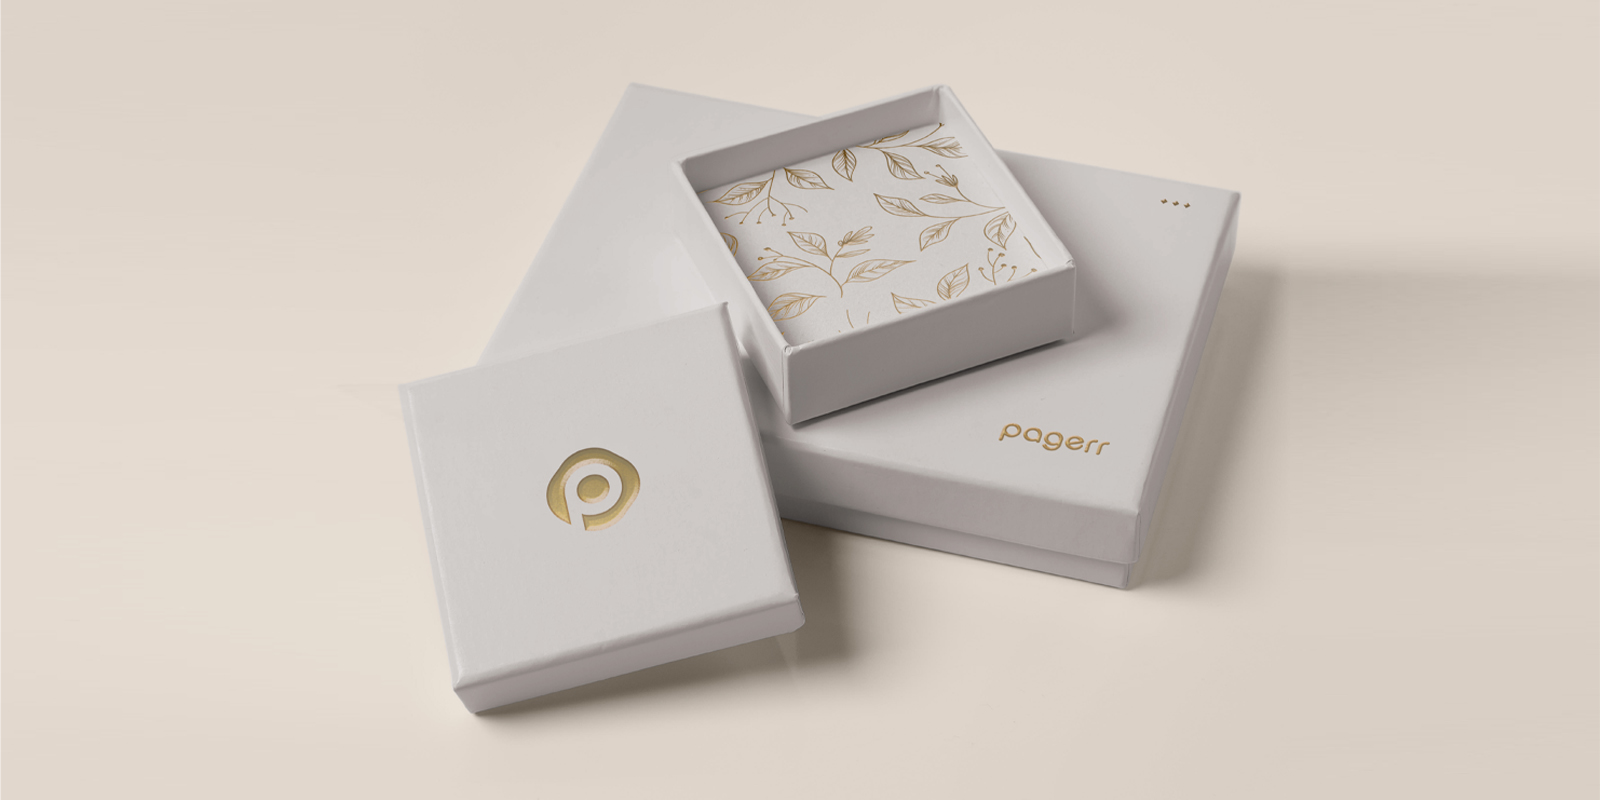 Product boxes in Hobart - Print with Pagerr